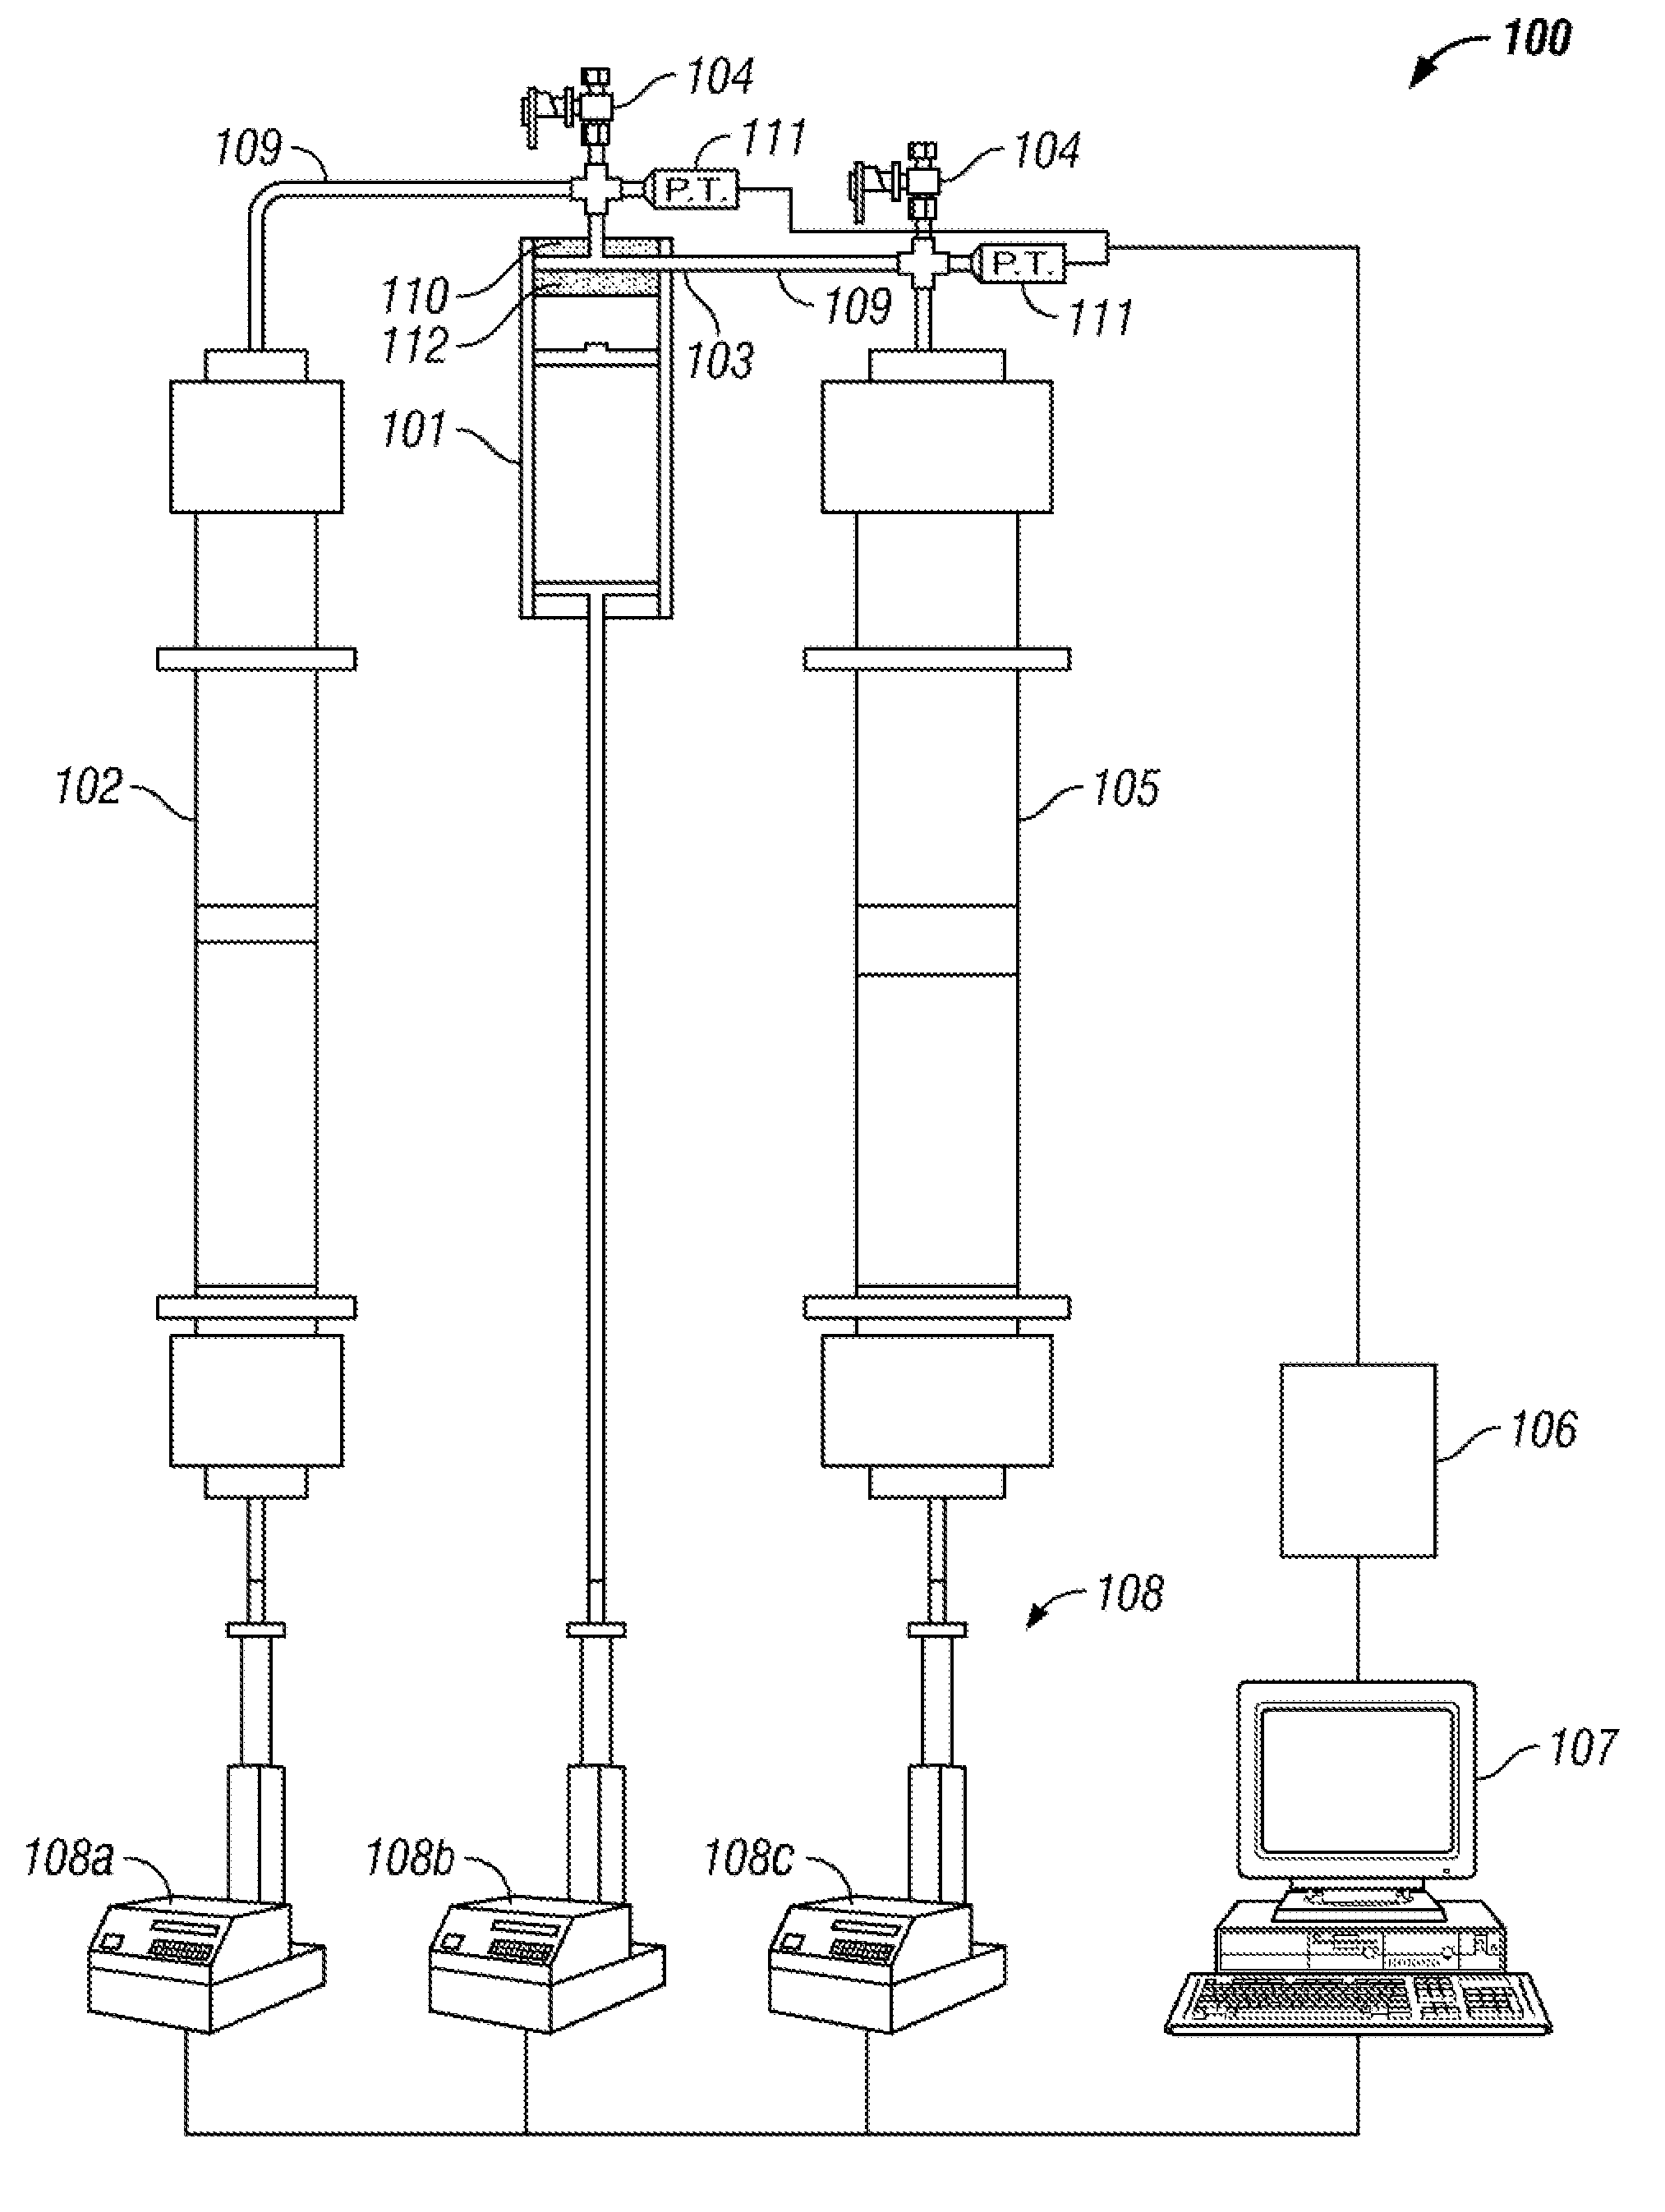 Fracture testing apparatus and method